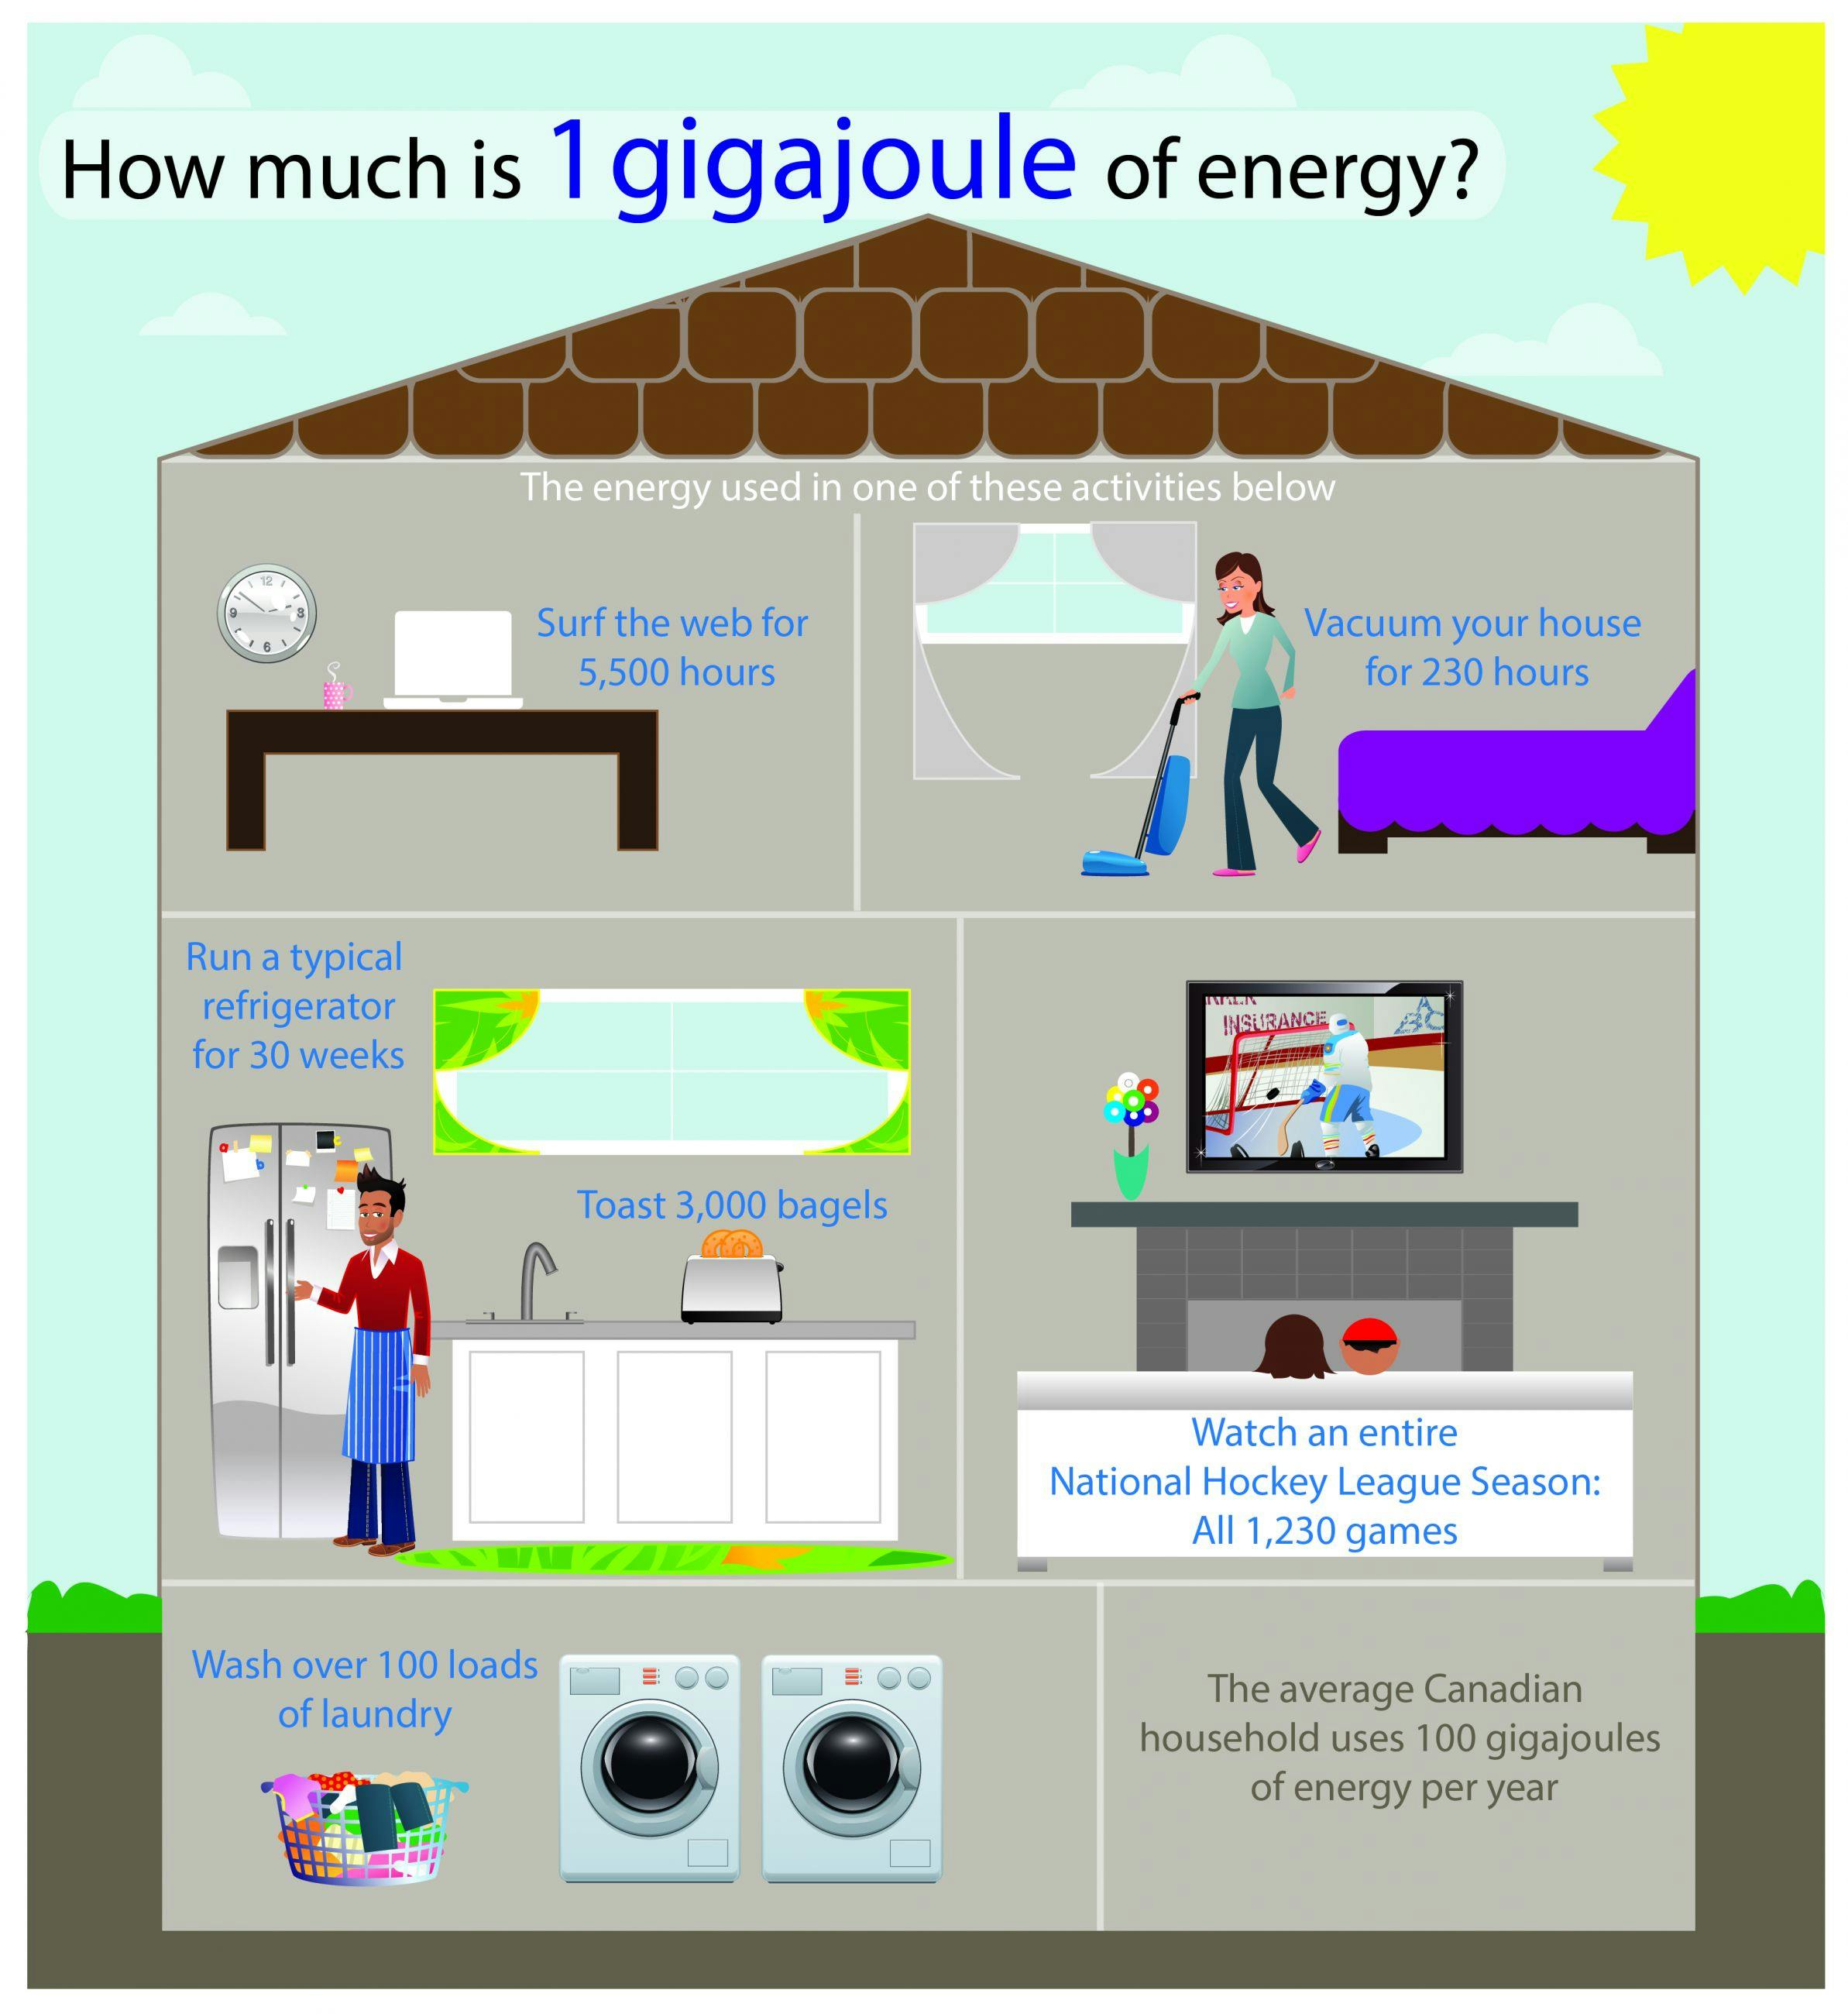 How much is 1 gigajoule of energy?